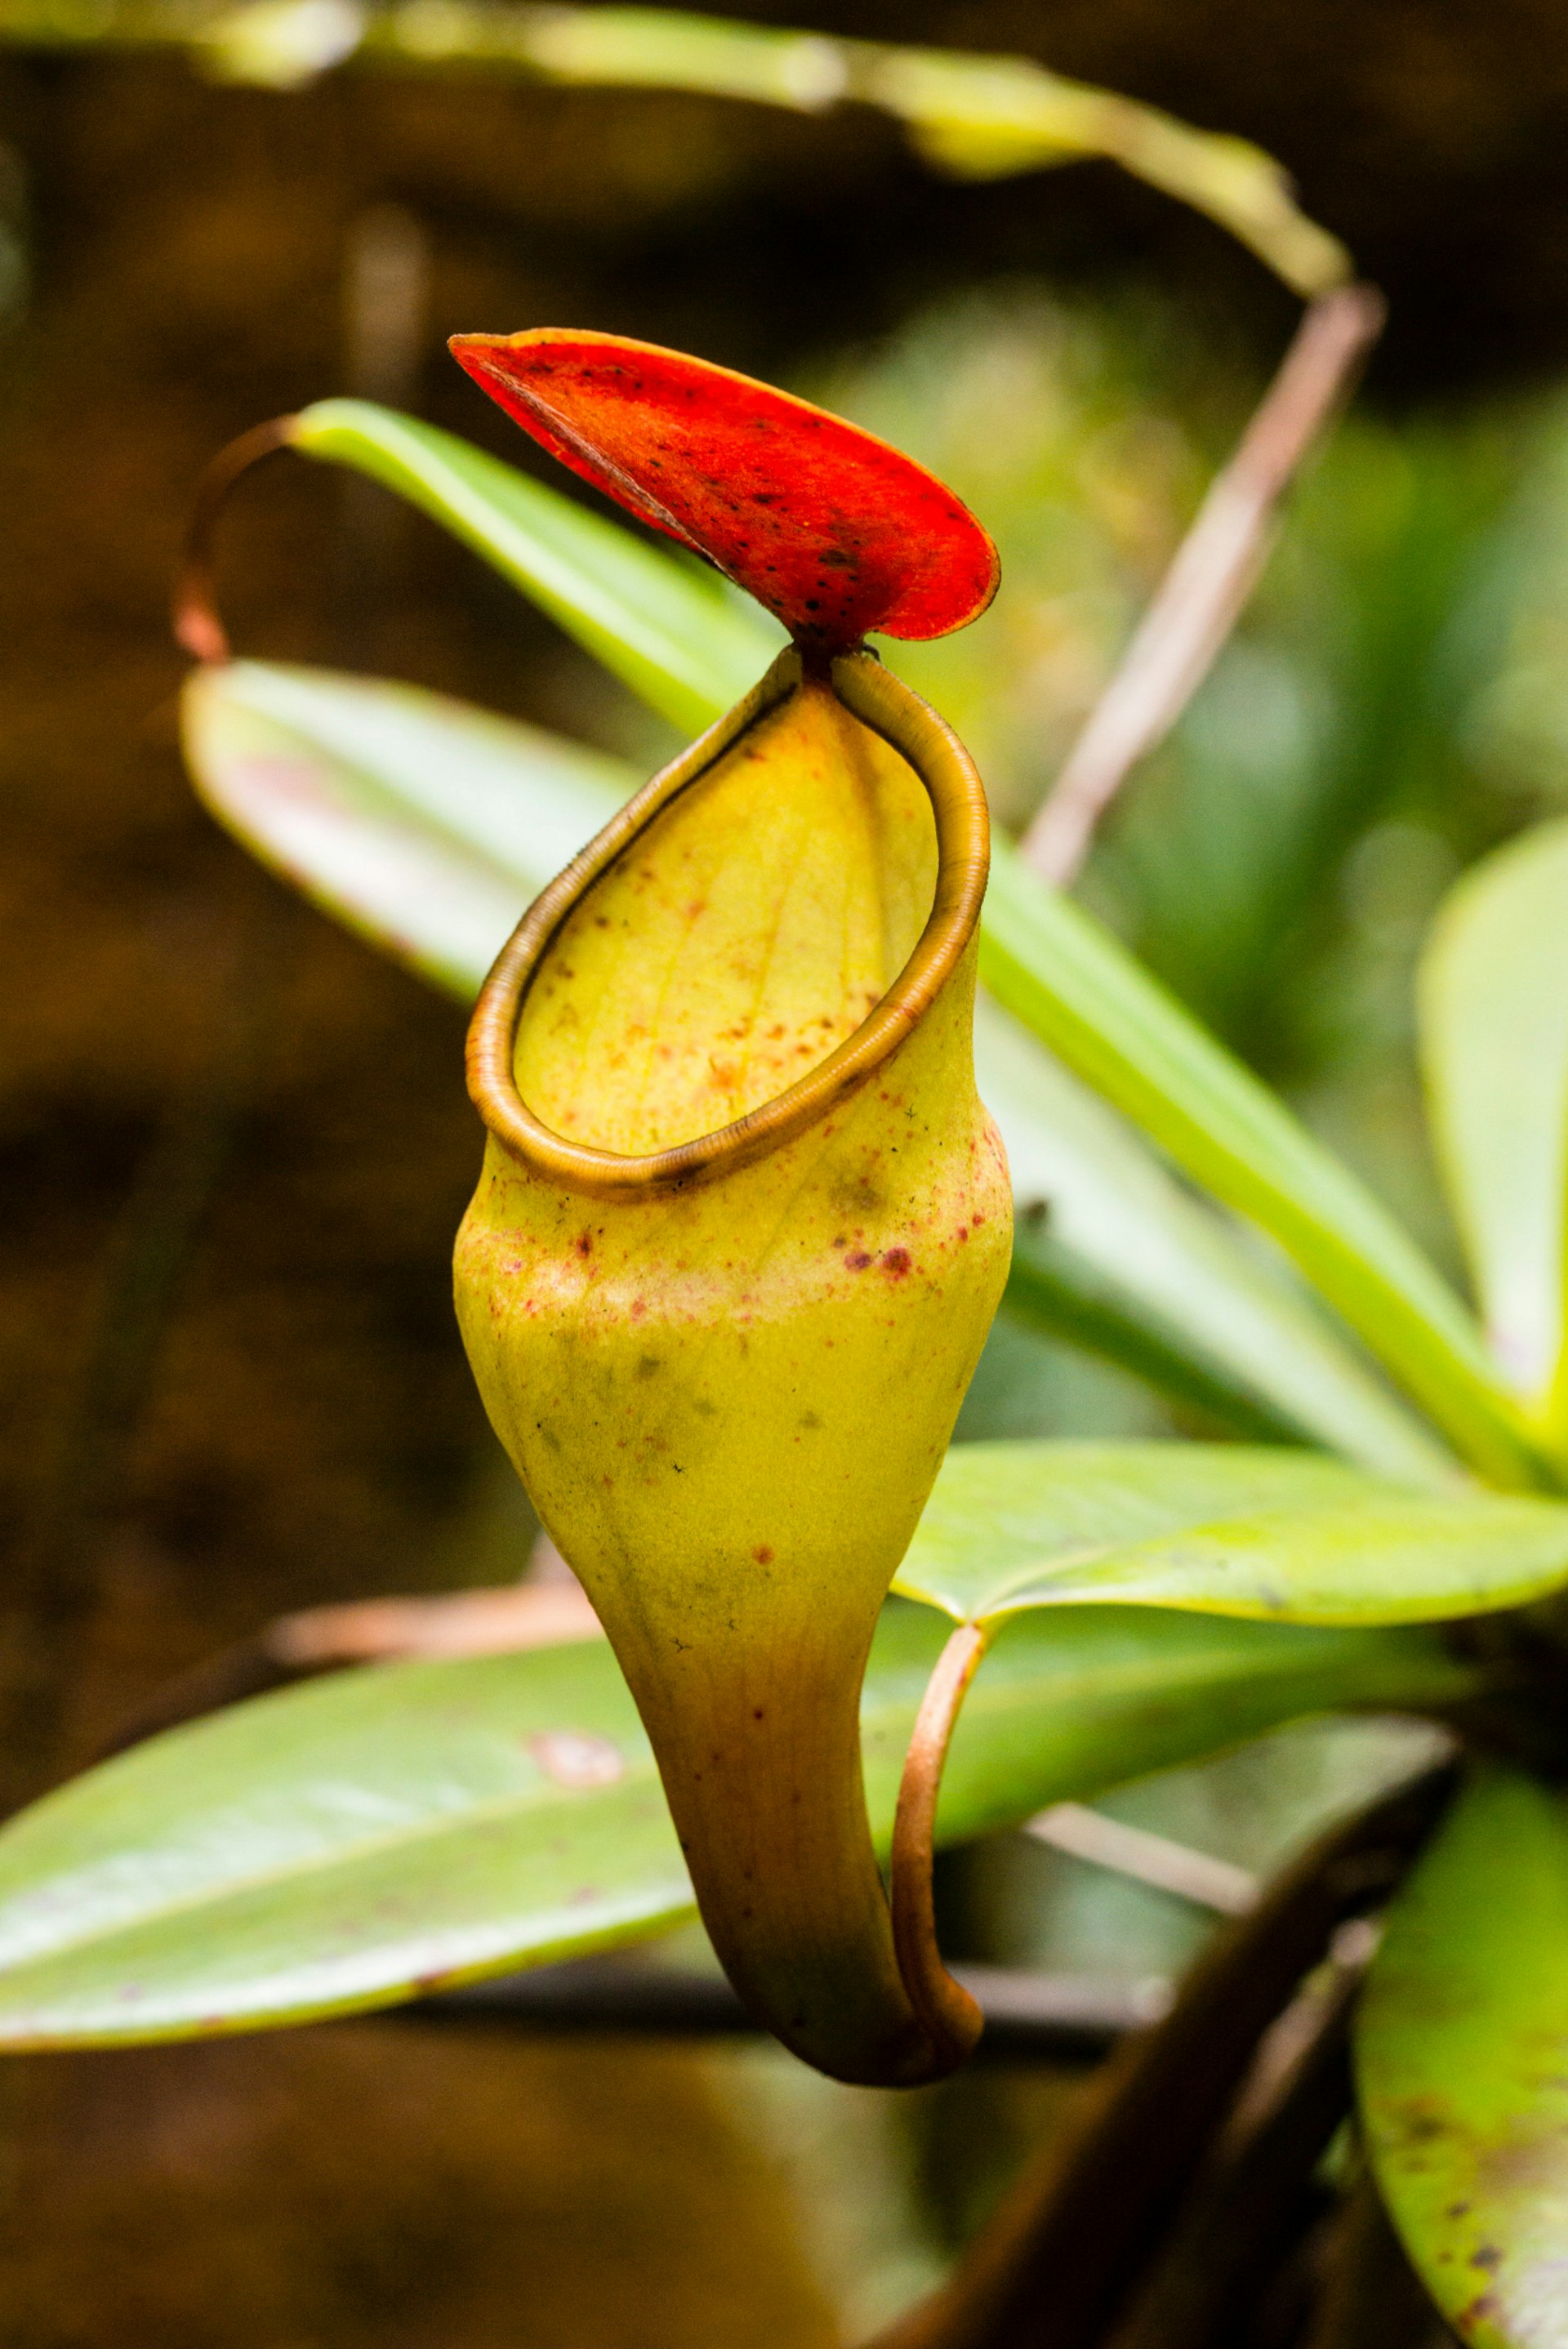 Deadly nature: looking like an ornate, greeny-yellow vase with a rolled tear-shaped rim and a leaf-like lid propped open, the carnivorous pitcher plant lies in wait for its next victim © Justin Foulkes/Lonely Planet 